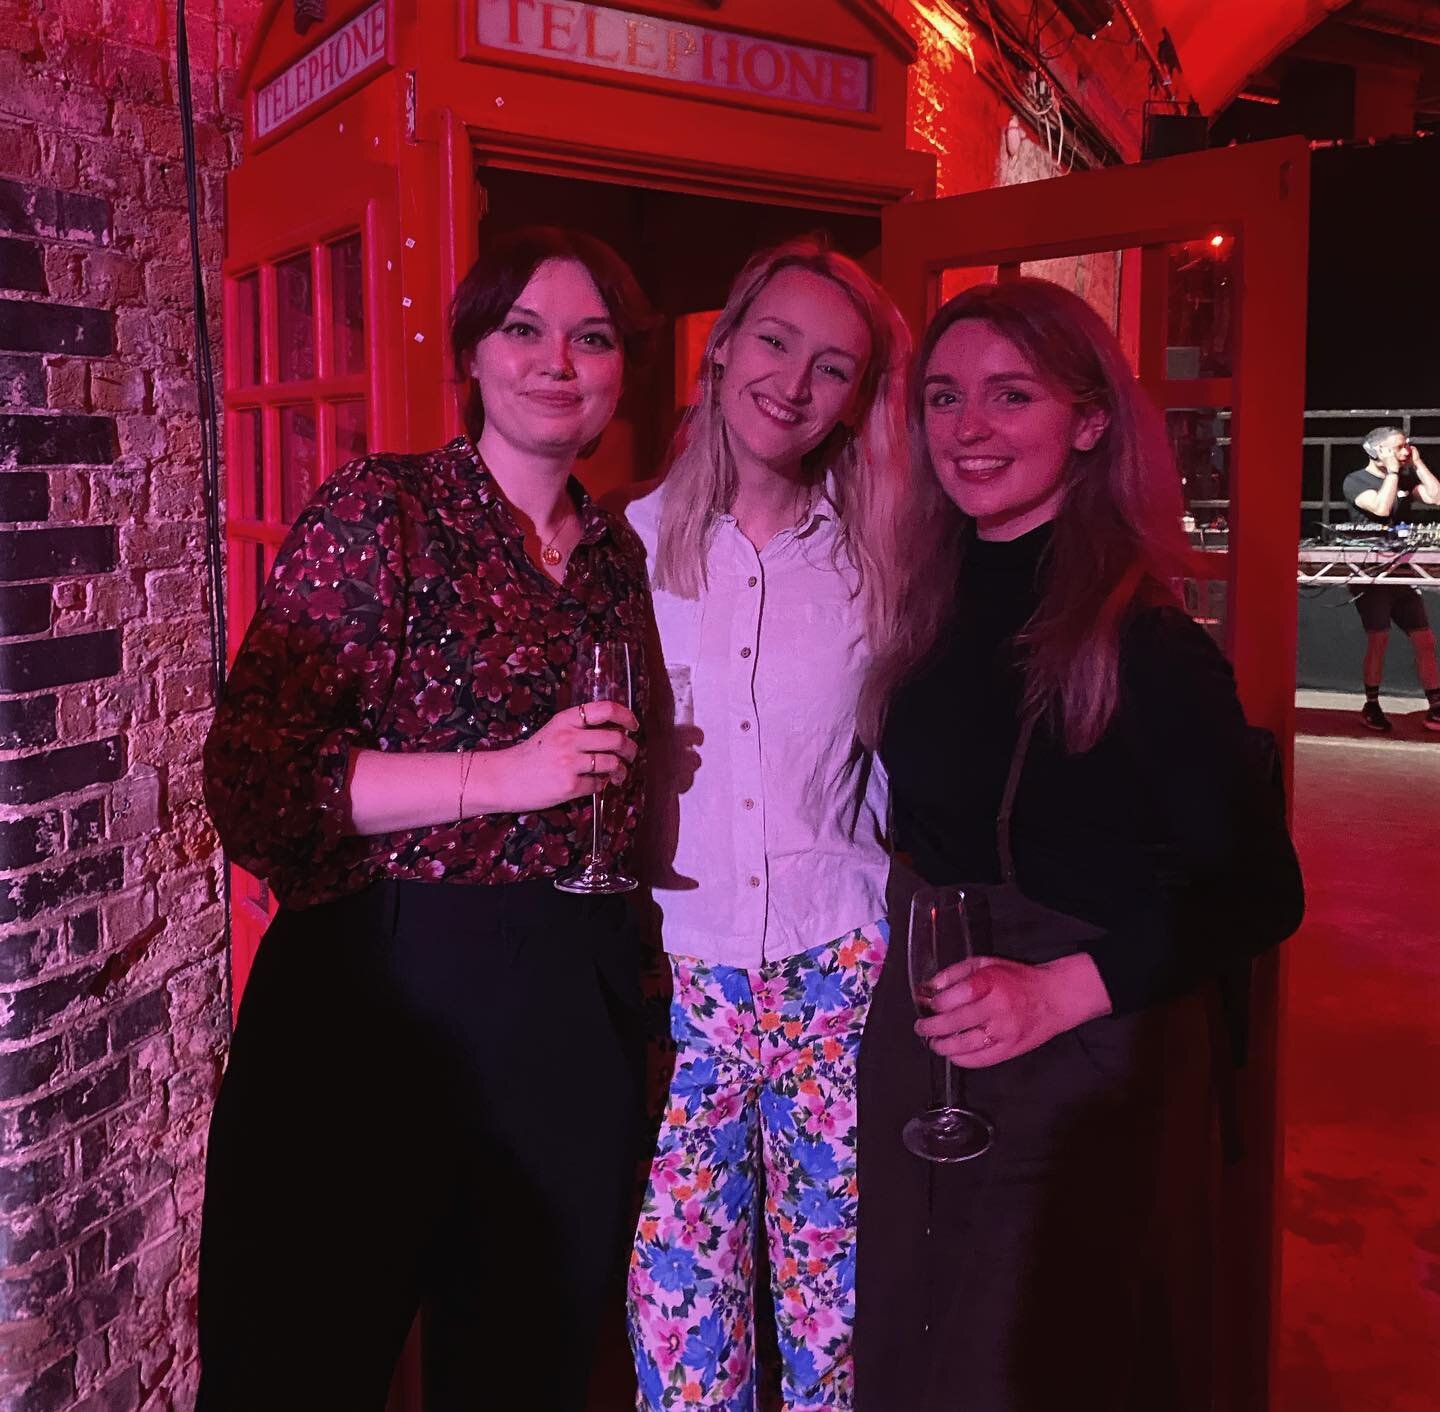 London Film Festival 2023 🎥
Grateful for such awesome mates and hype team 💜🌟
☕️📸

#lff2023 #londonfilmfestival #composer #womeninmusic #hypeteam